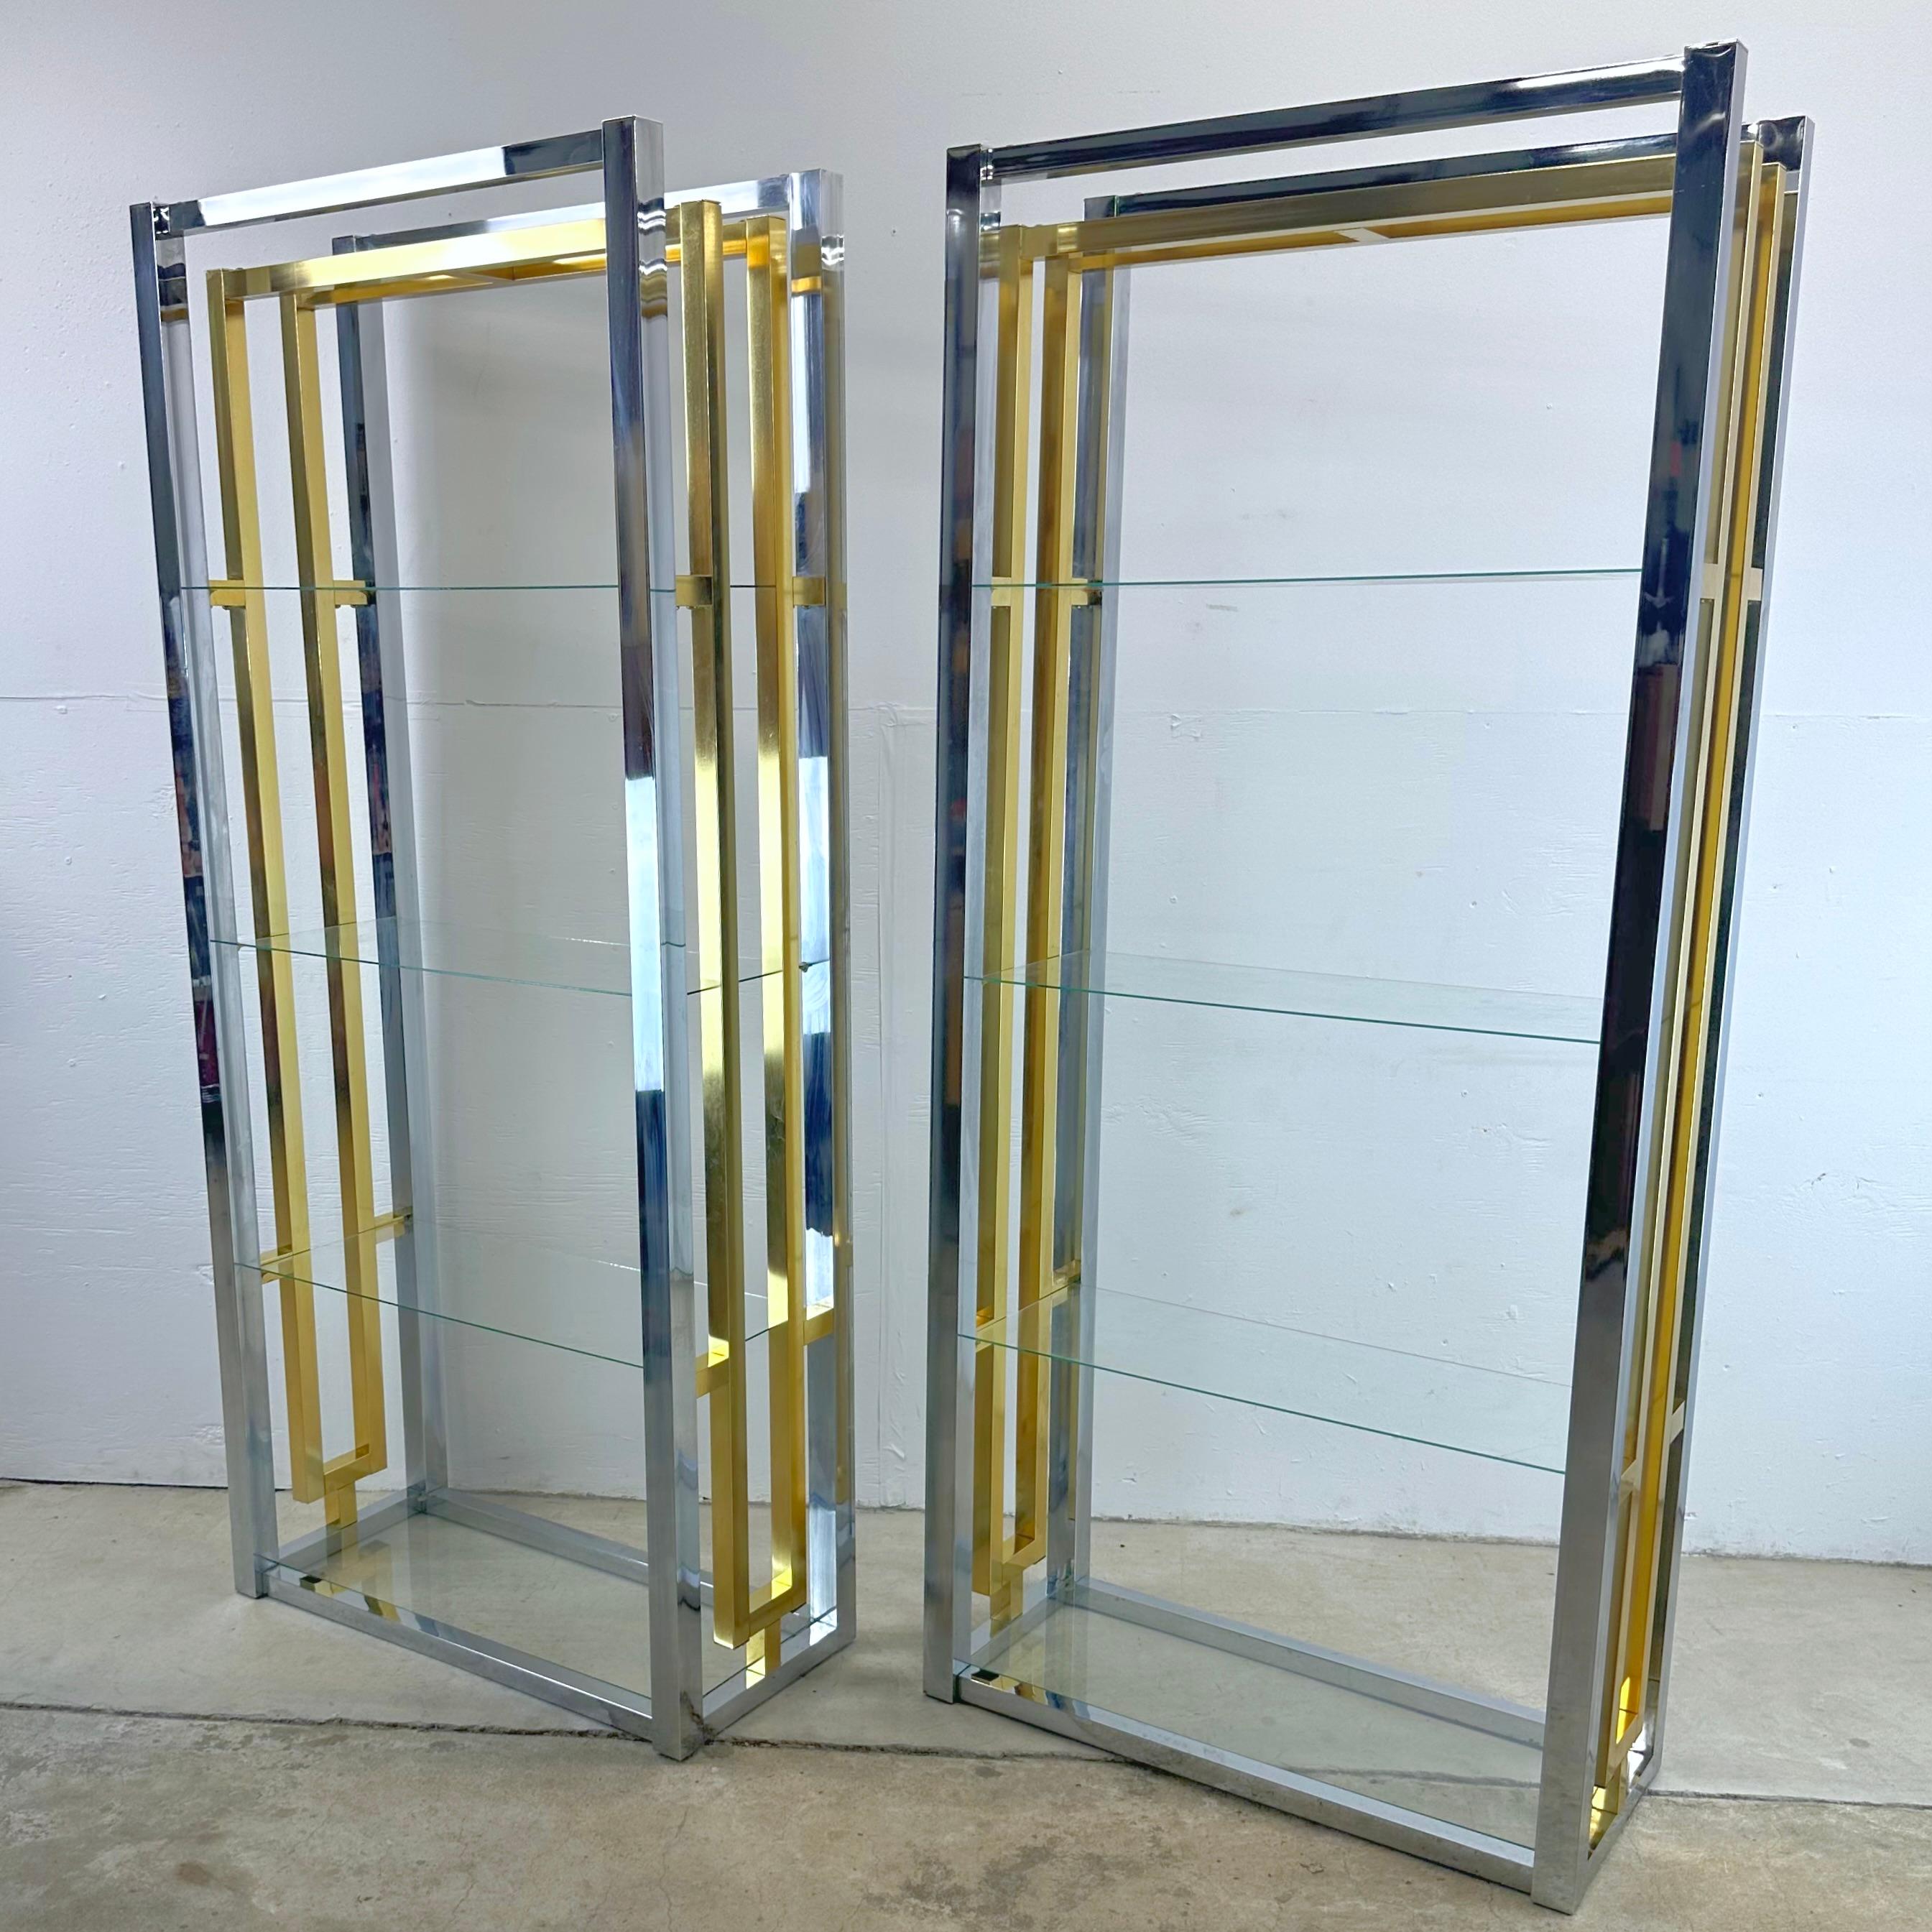 Embrace the timeless charm of mid-century design with this stunning pair of chrome and brass finish etageres with glass shelves. These pieces pay homage to an era where sleek lines, the fusion of metal and glass were synonymous with style, and they